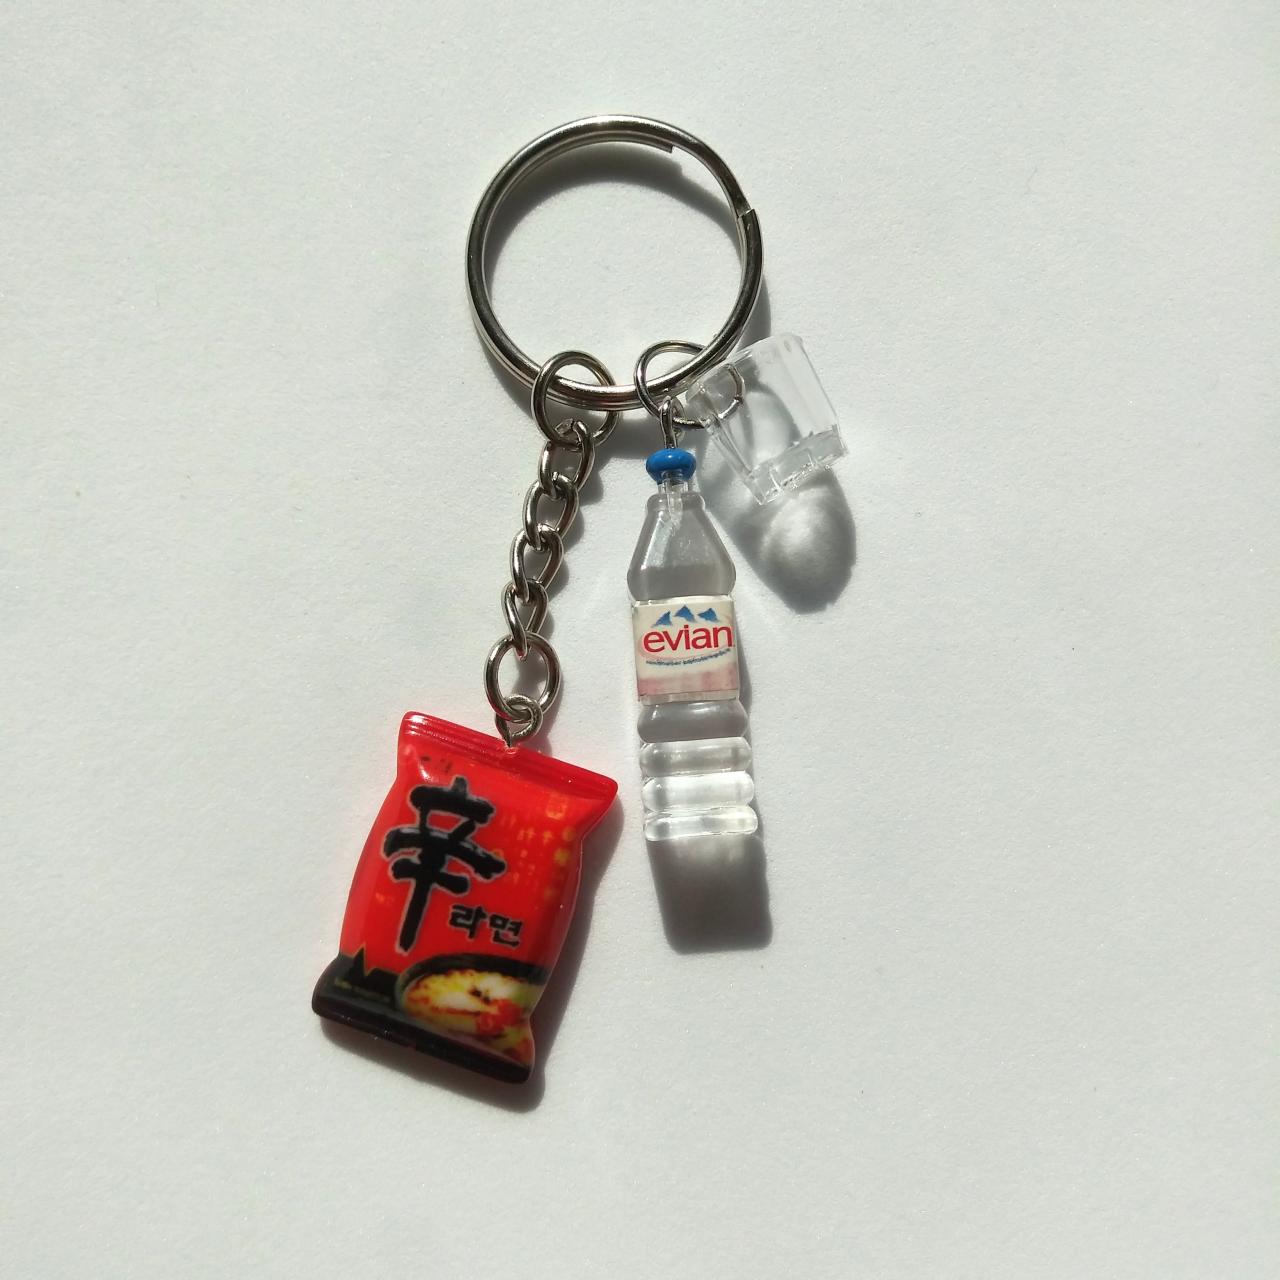 Korean Shin辛 Ramen Noodles With Water Bottle And Drinking Glass Cup Keychain, Funny Keychain, Miniature Food Keychain